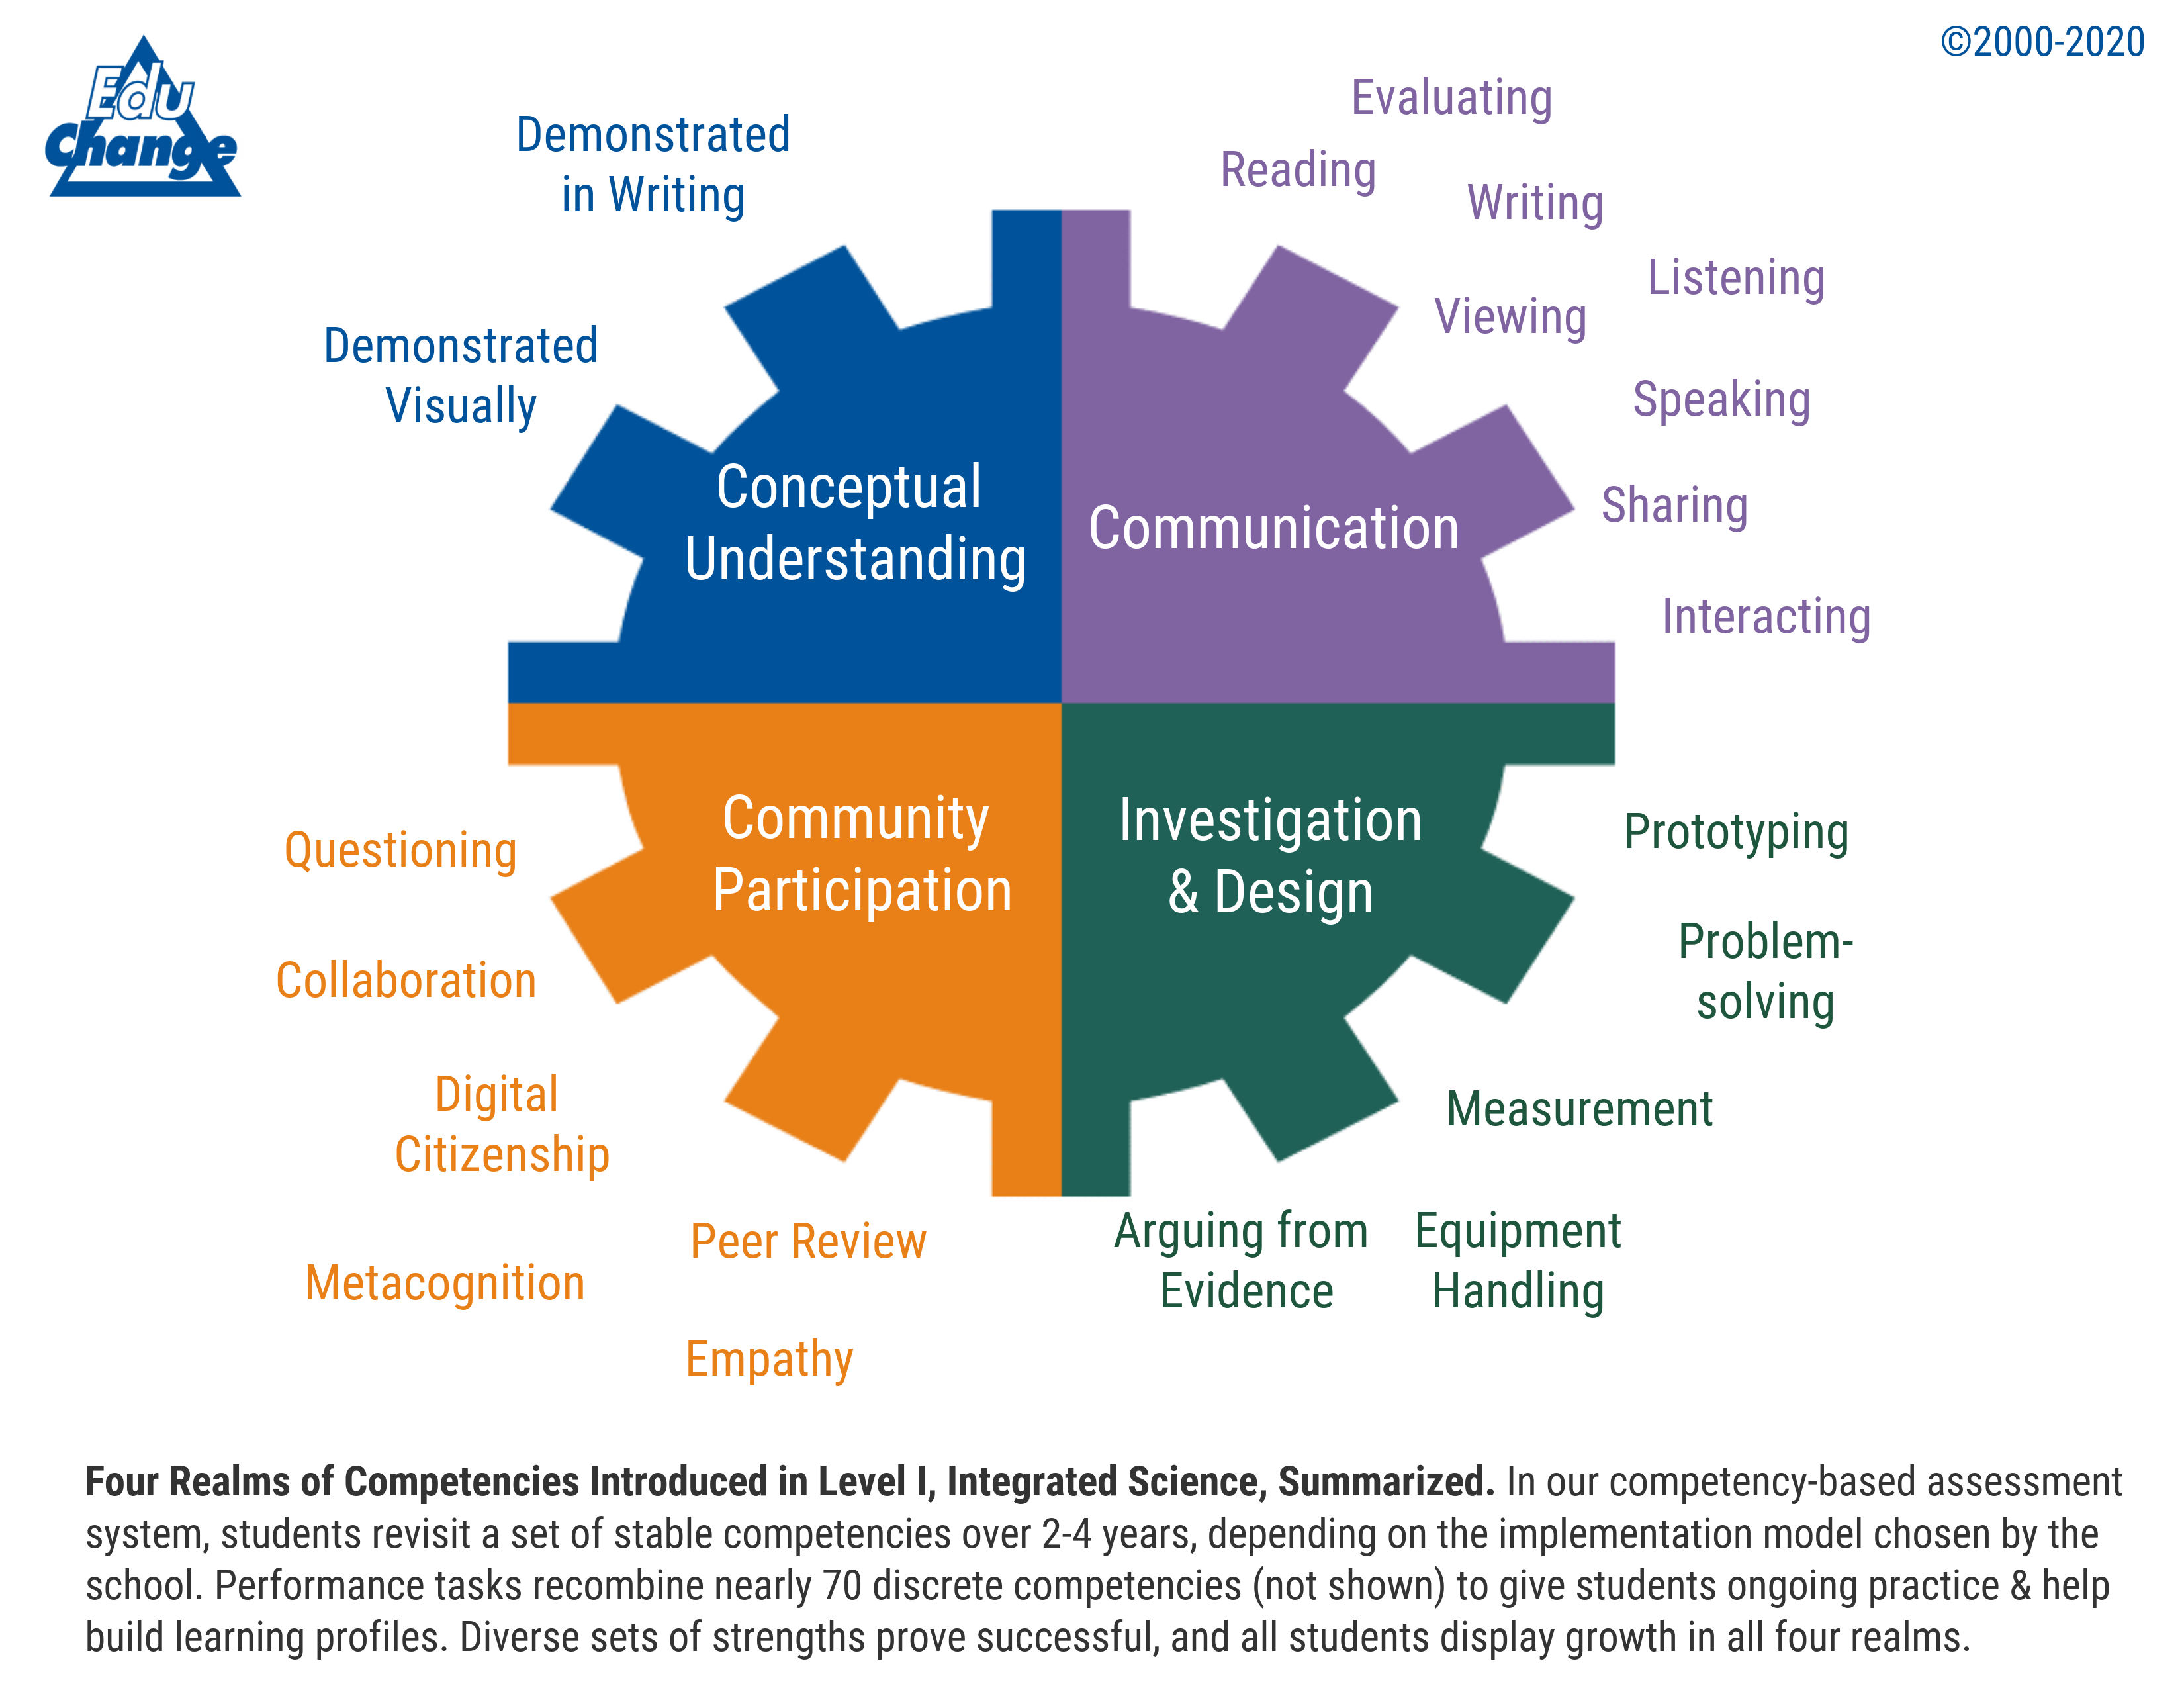 This gear is divided into four quadrants, representing the four realms of competencies and dispositions that build the Integrated Science Level I rubrics.